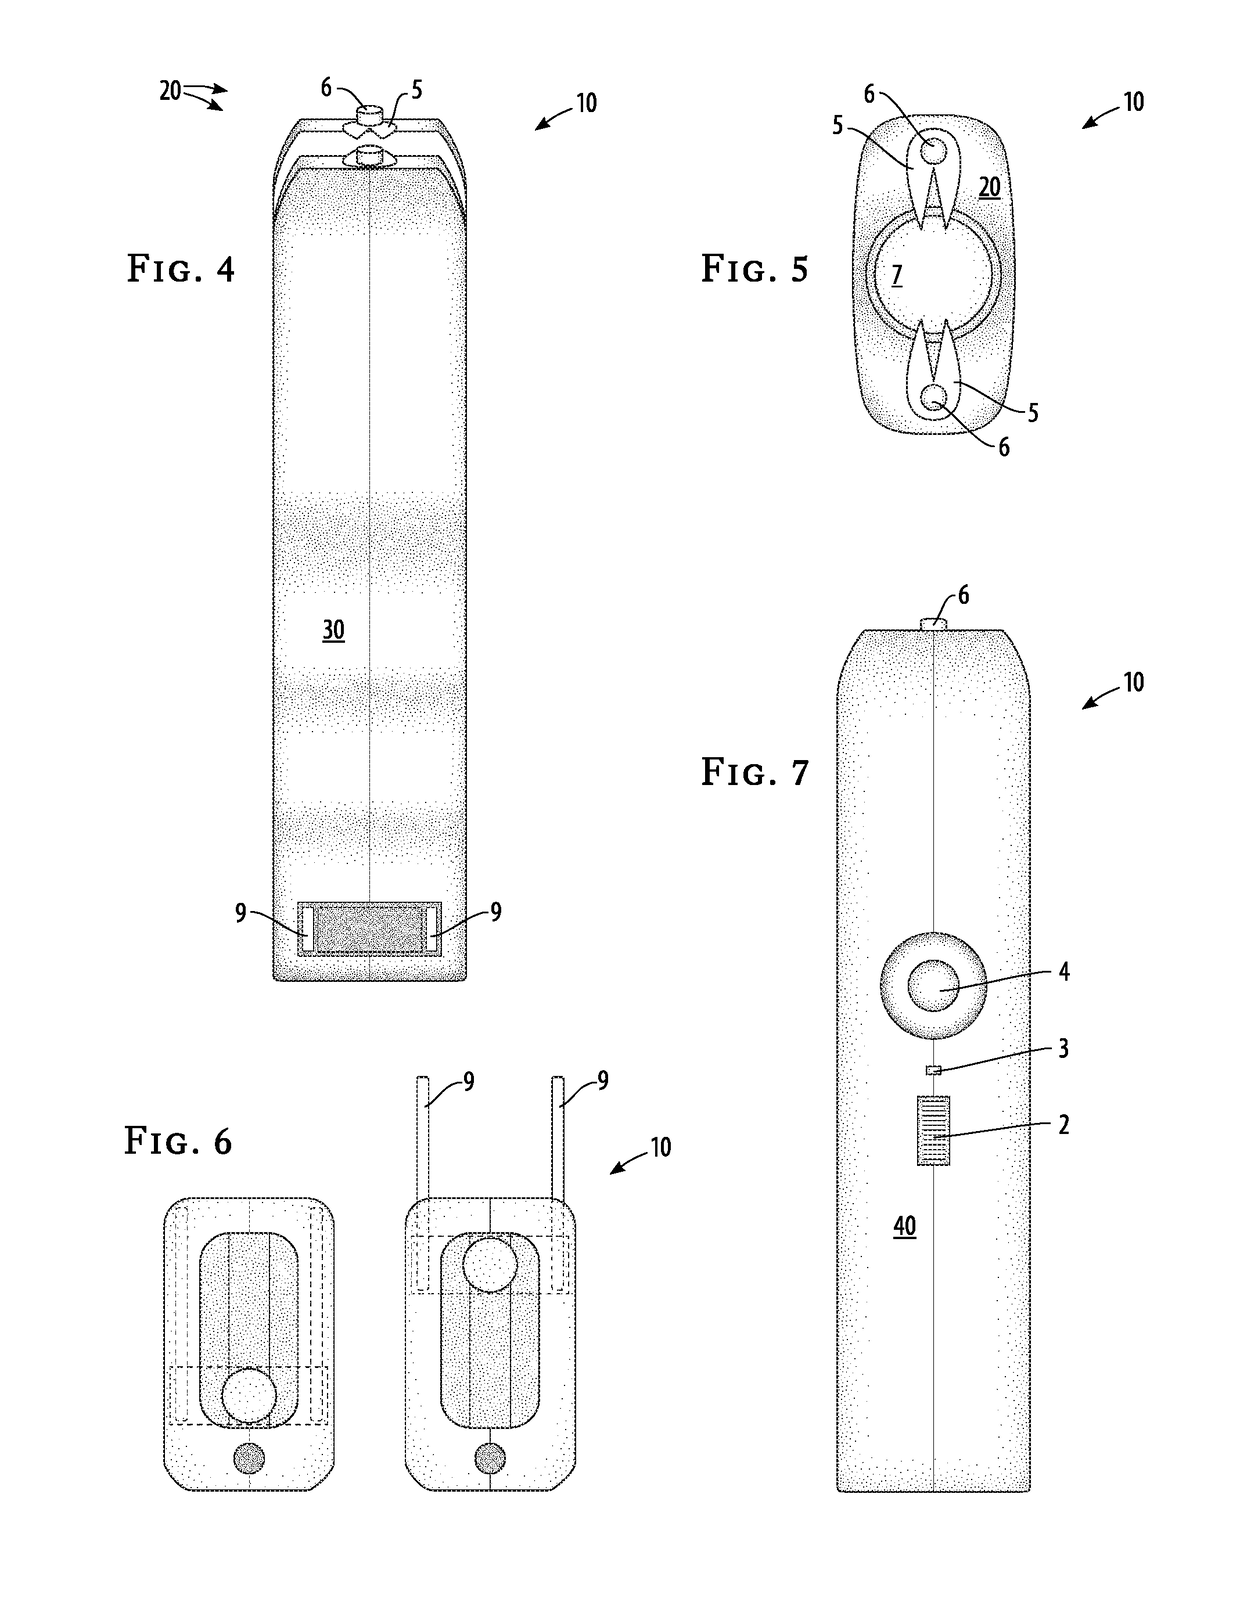 Hand-held personal-protection shock device